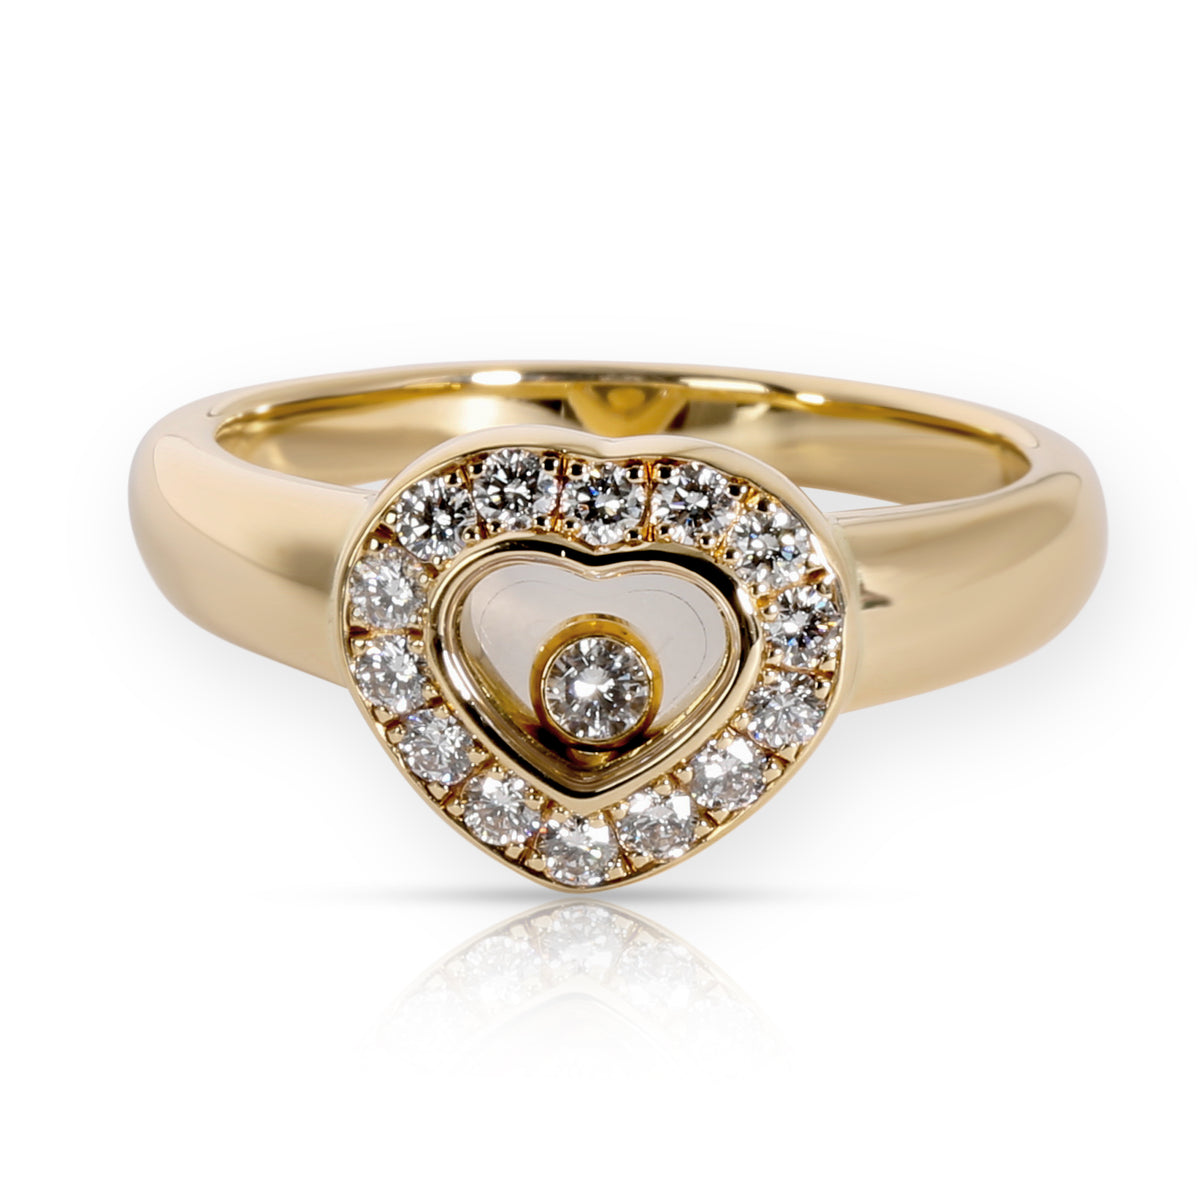 Chopard Happy Icons Heart Diamond Ring in 18KT Yellow Gold 0.24 CTW